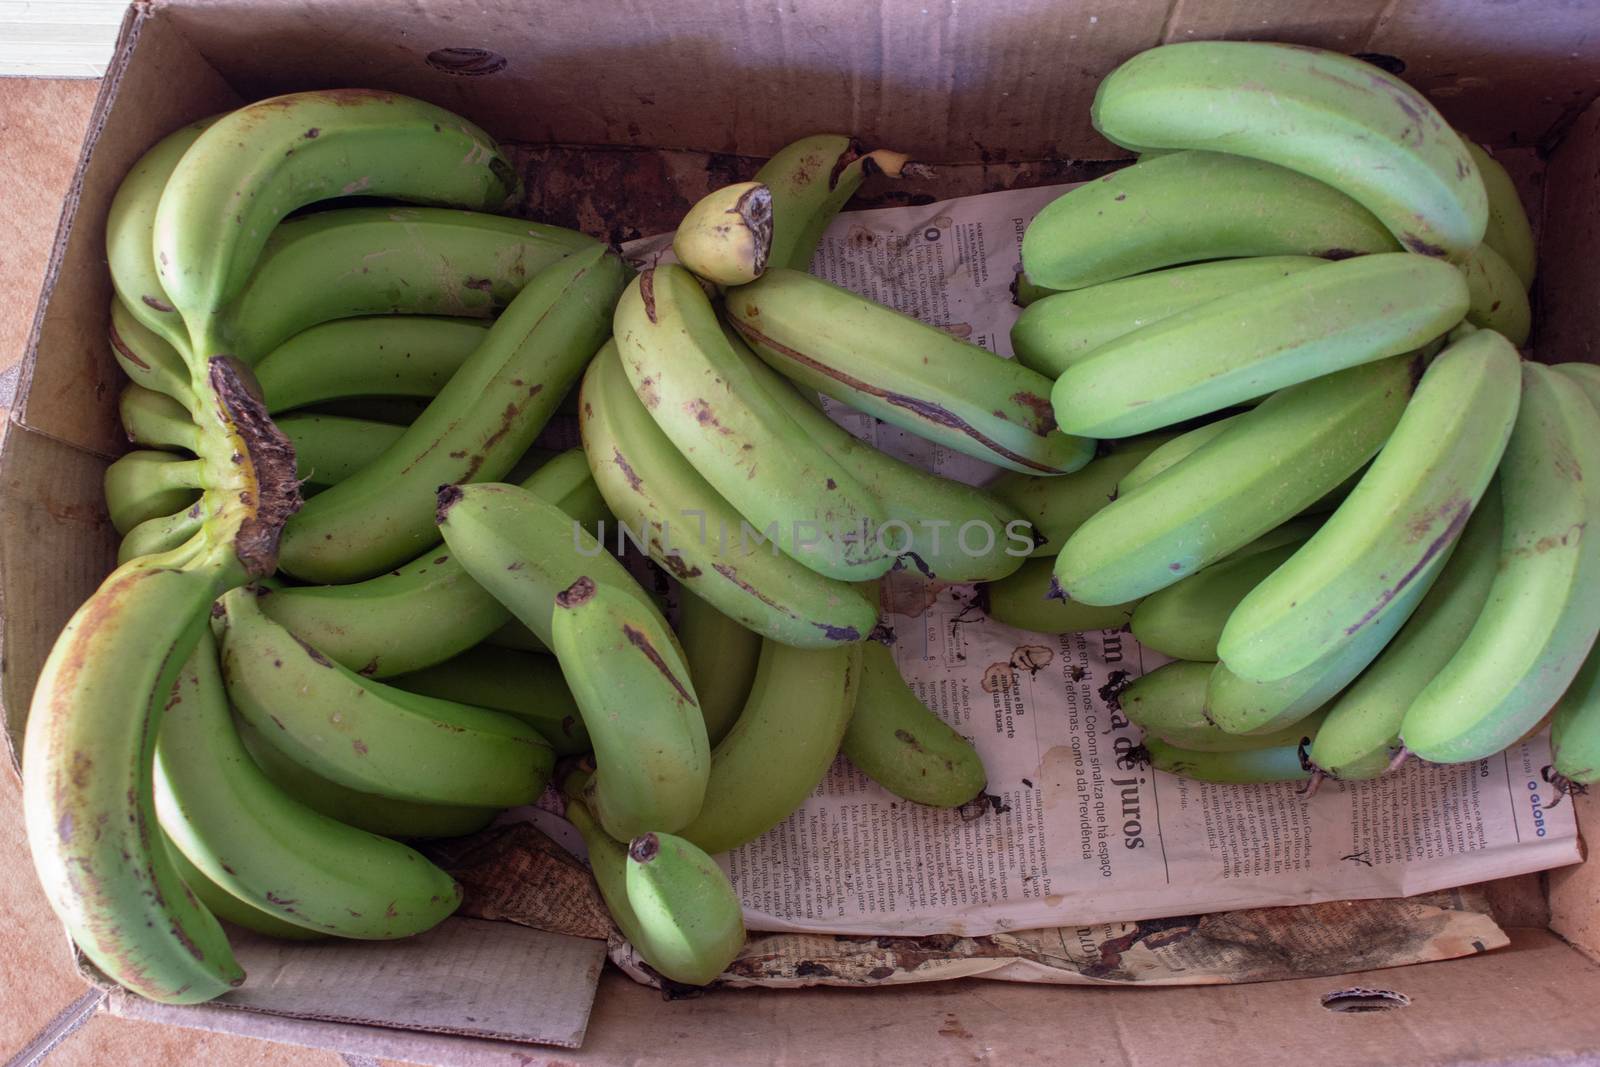 A box full of green bananas, not ready to be eaten yet